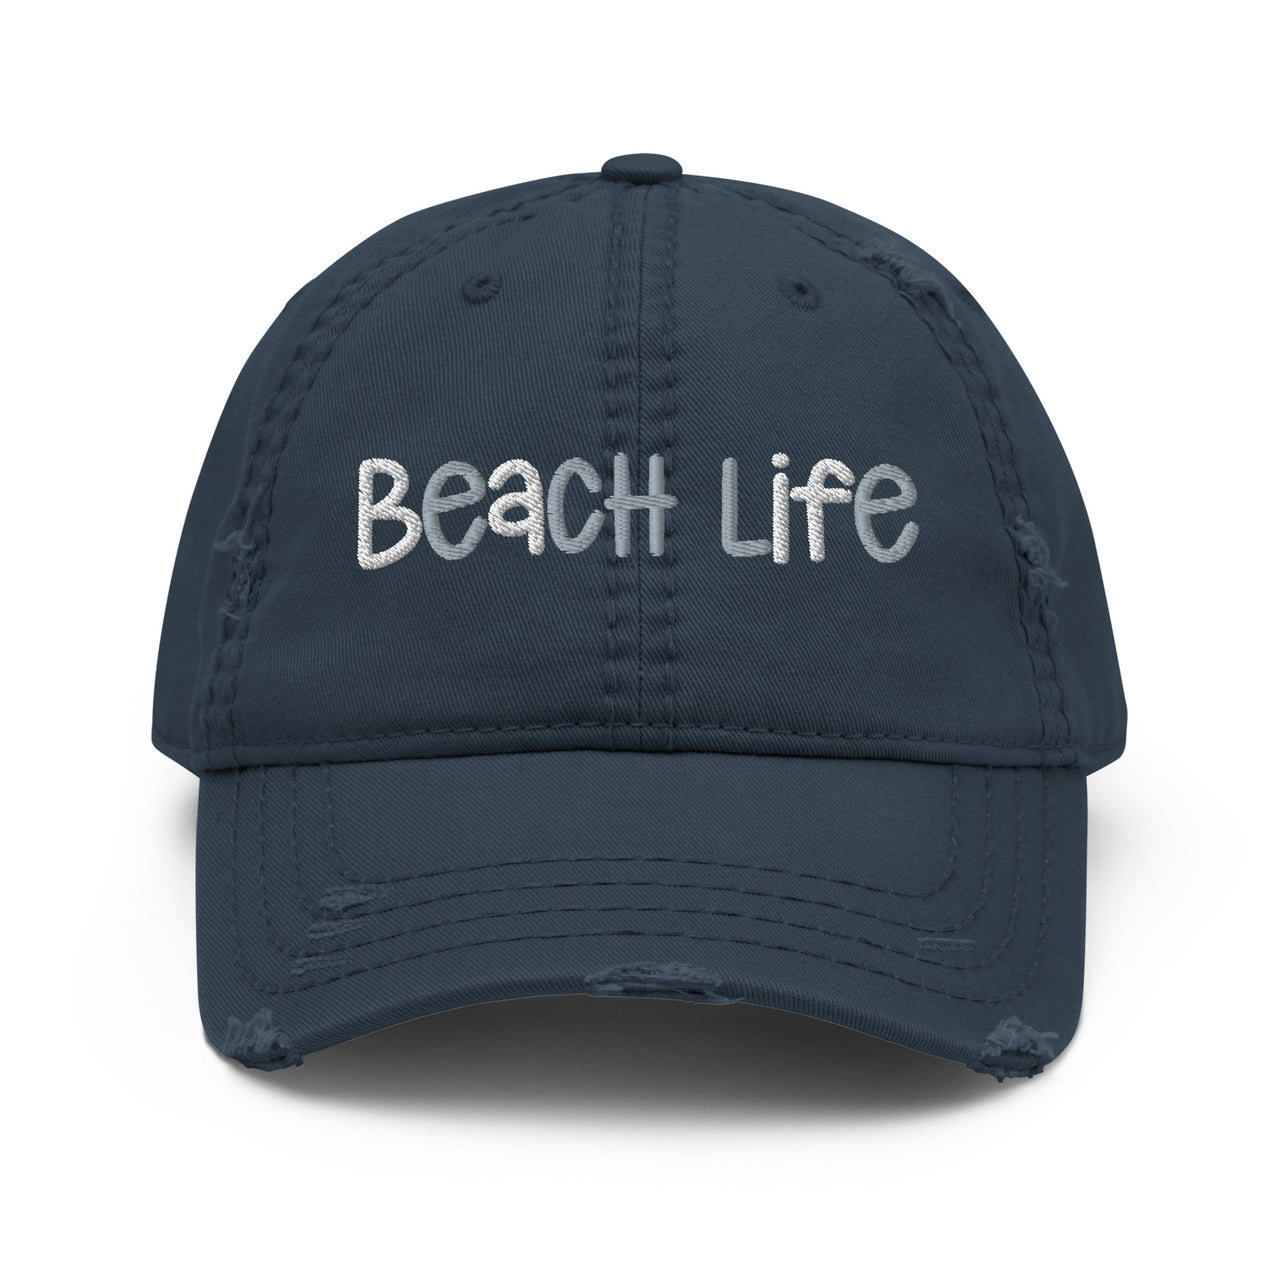 Beach Life Distressed Cap  New England Trading Co Navy  